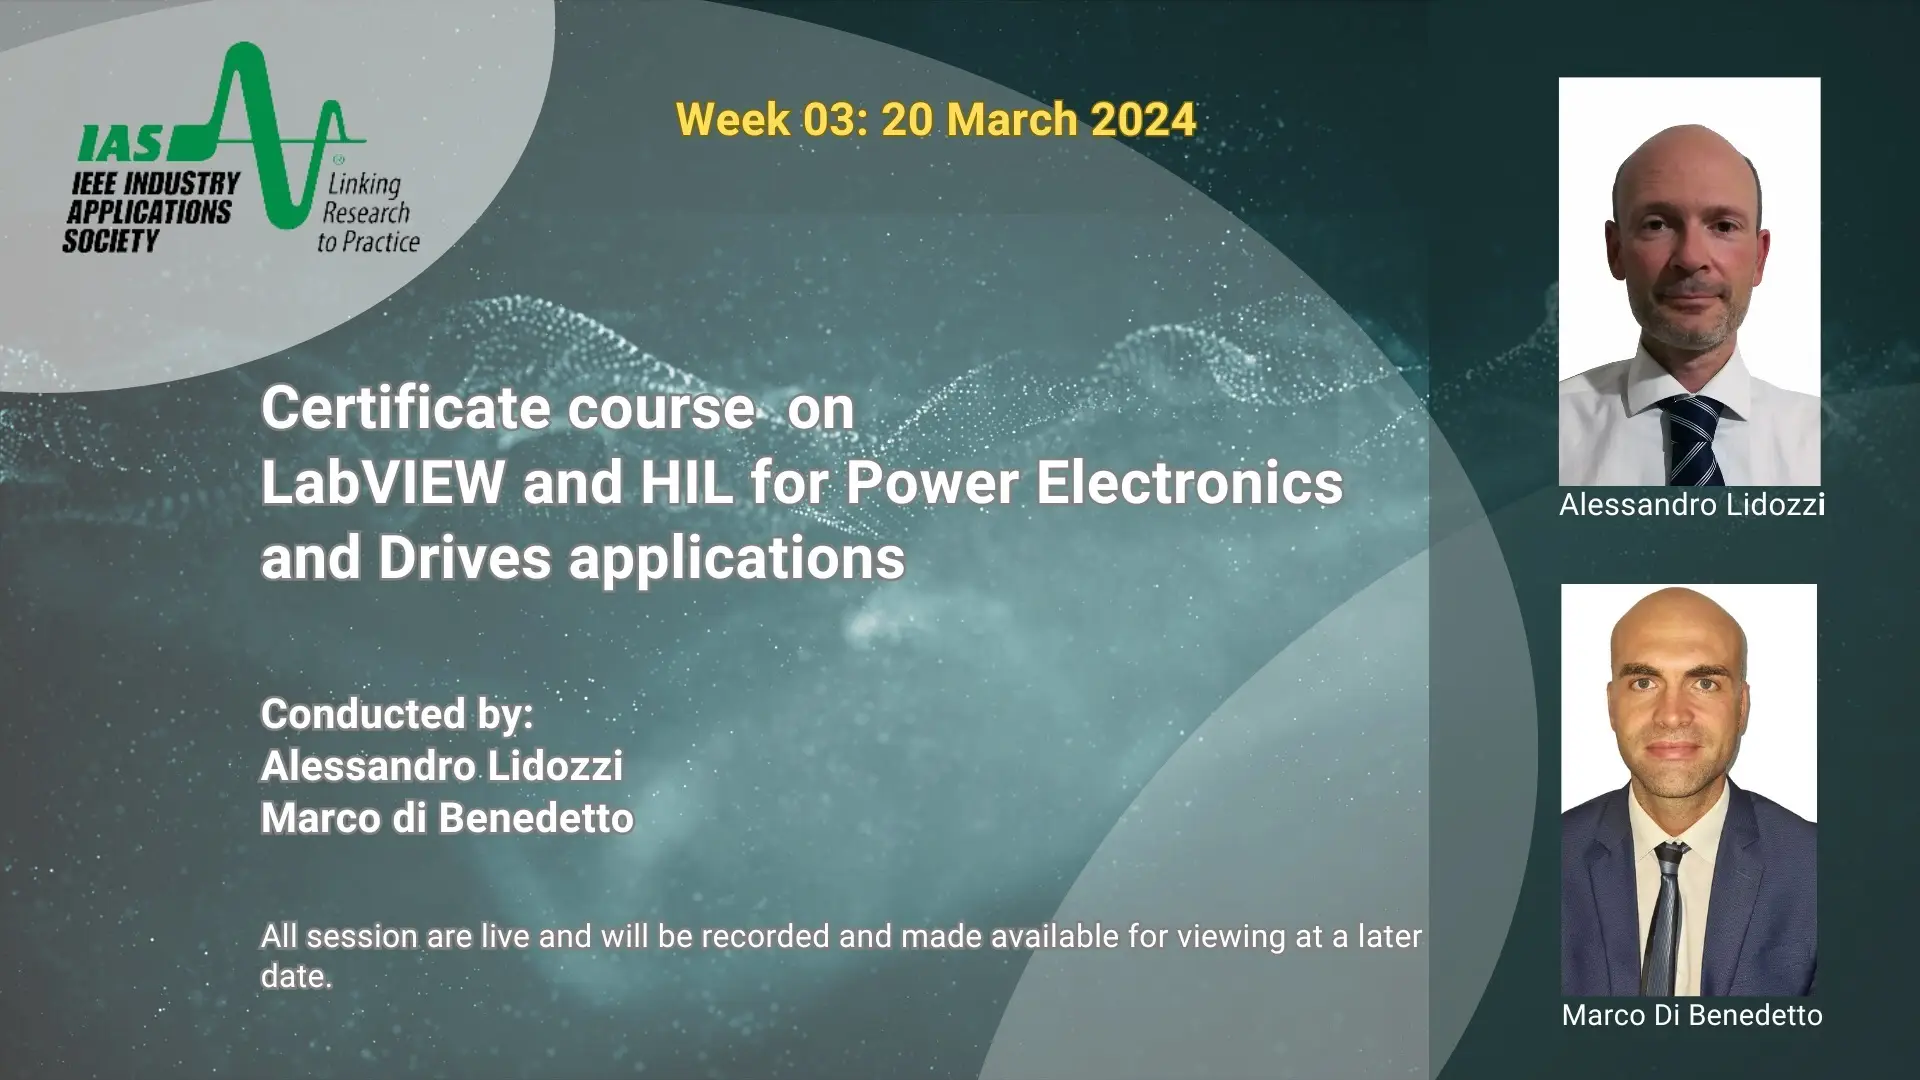 Week 03: Certificate Course on LabVIEW and HIL for Power Electronics and Drives Applications